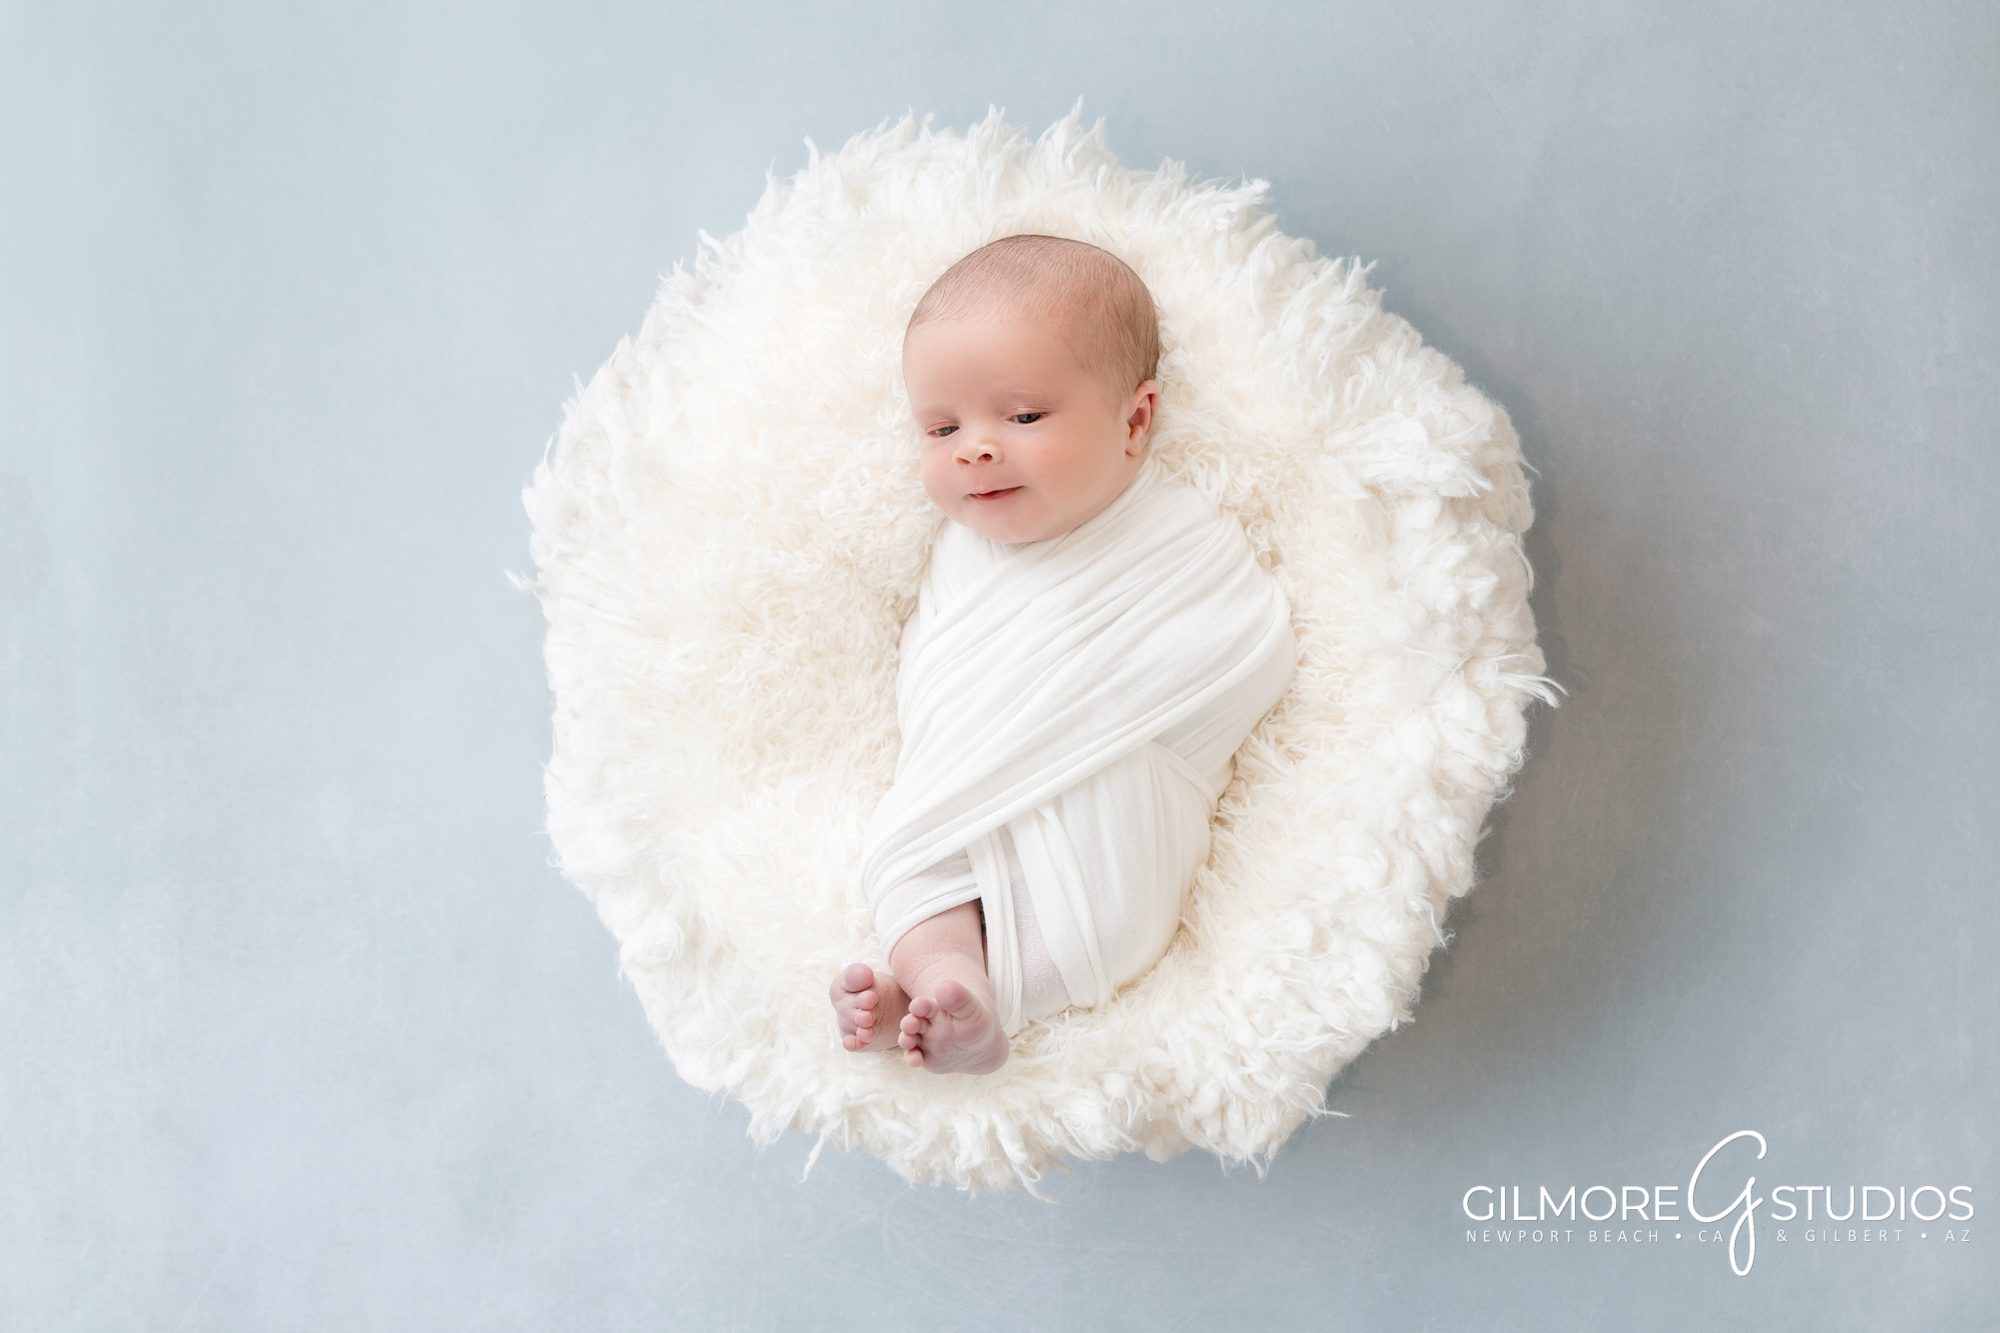 Gilbert Newborn Photographer, family portrait with baby, baby studio in Gilbert, AZ - Chandler, Queen Creek, Scottsdale, Professional Newborn Photography Studio, family session with toddler and newborn baby boy. blue background, baby bowl prop, clean and simple, it's a boy